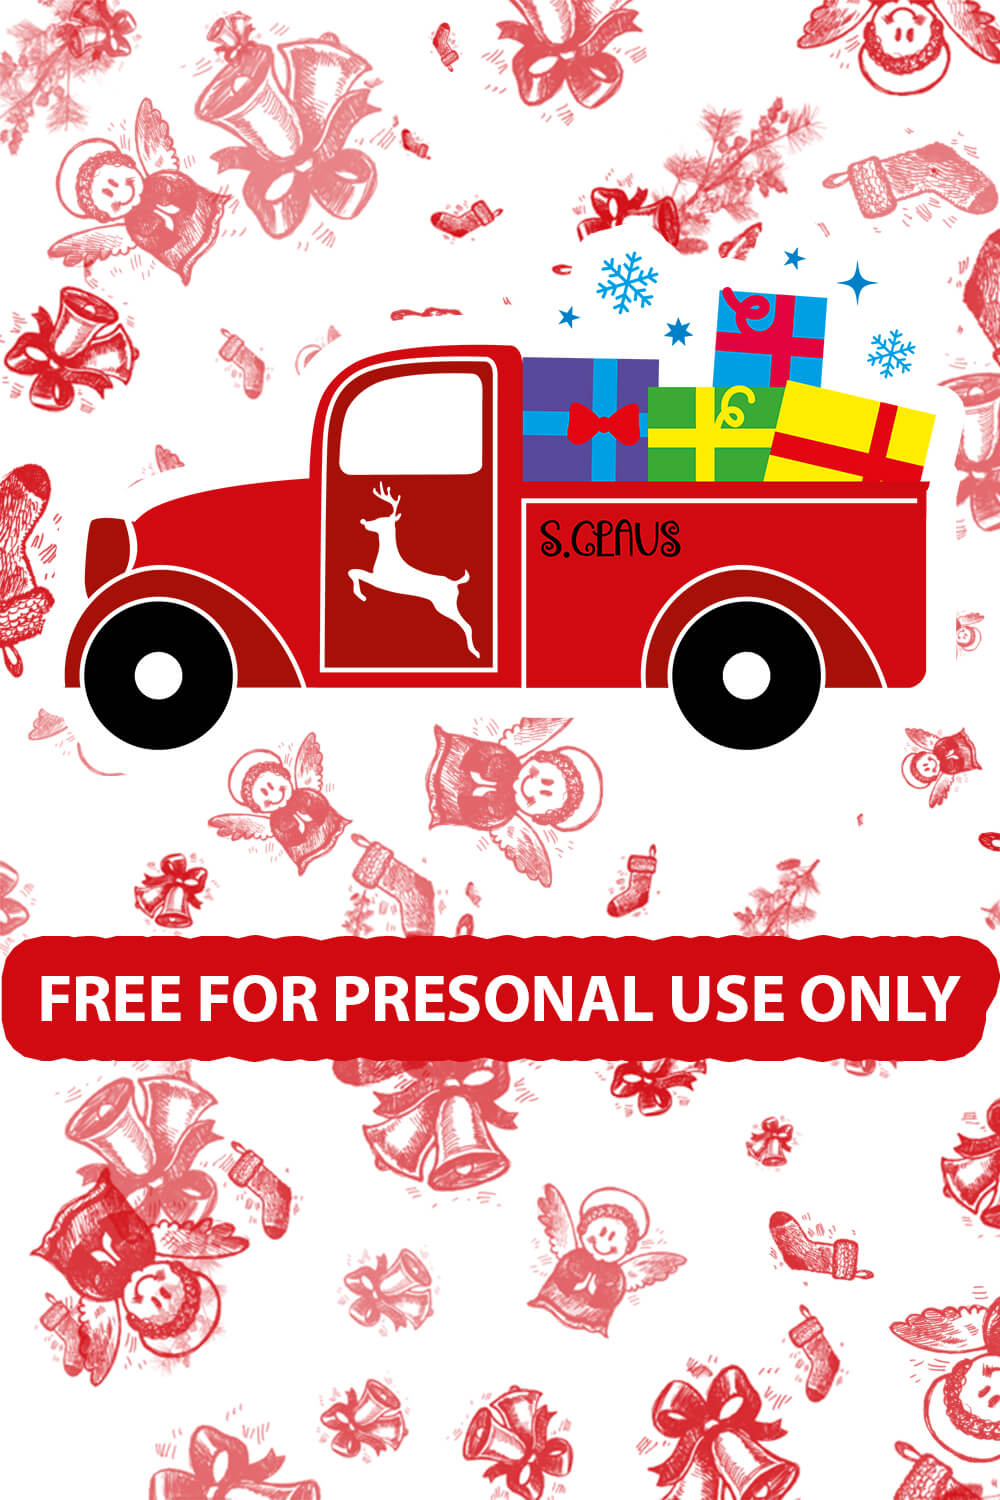 Christmas pick up truck presents free SVG files pinterest image.